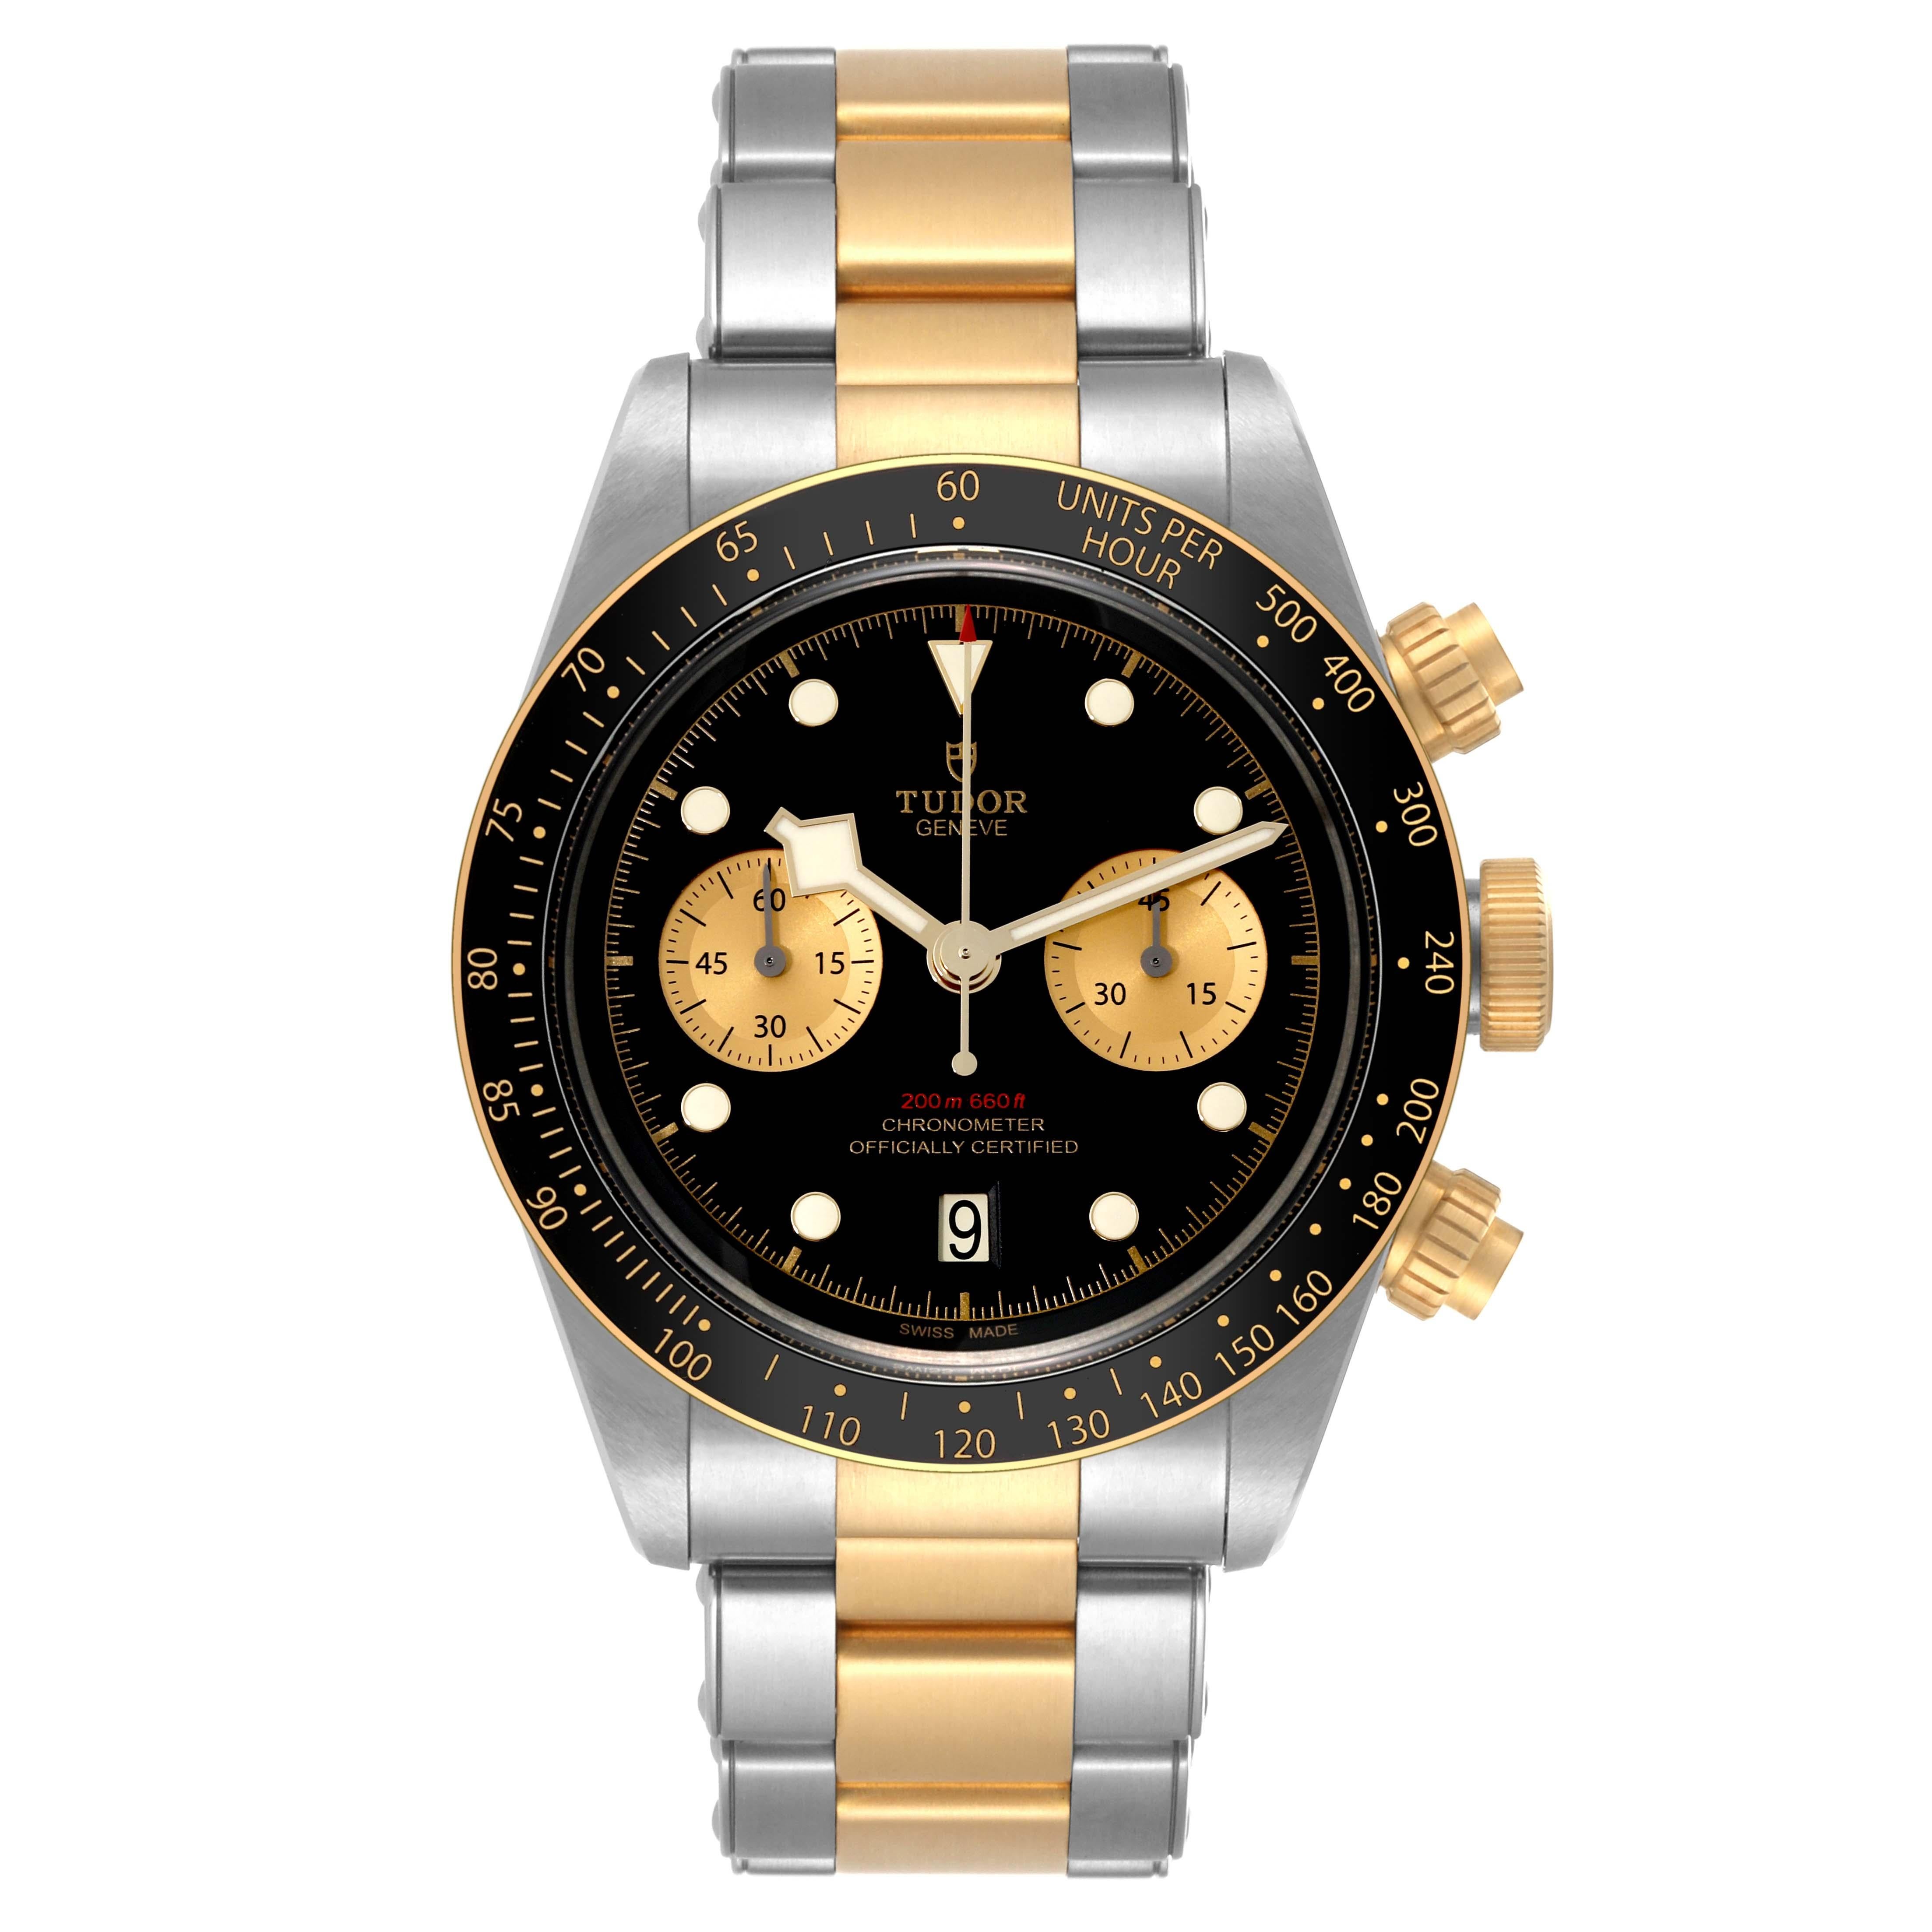 Tudor Heritage Black Bay Steel Yellow Gold Mens Watch 79363 Box Card. Automatic self-winding movement. Stainless steel and 18K yellow gold oyster case 41 mm in diameter. Tudor logo on a crown. 18k yellow gold bezel with a black anodised aluminium